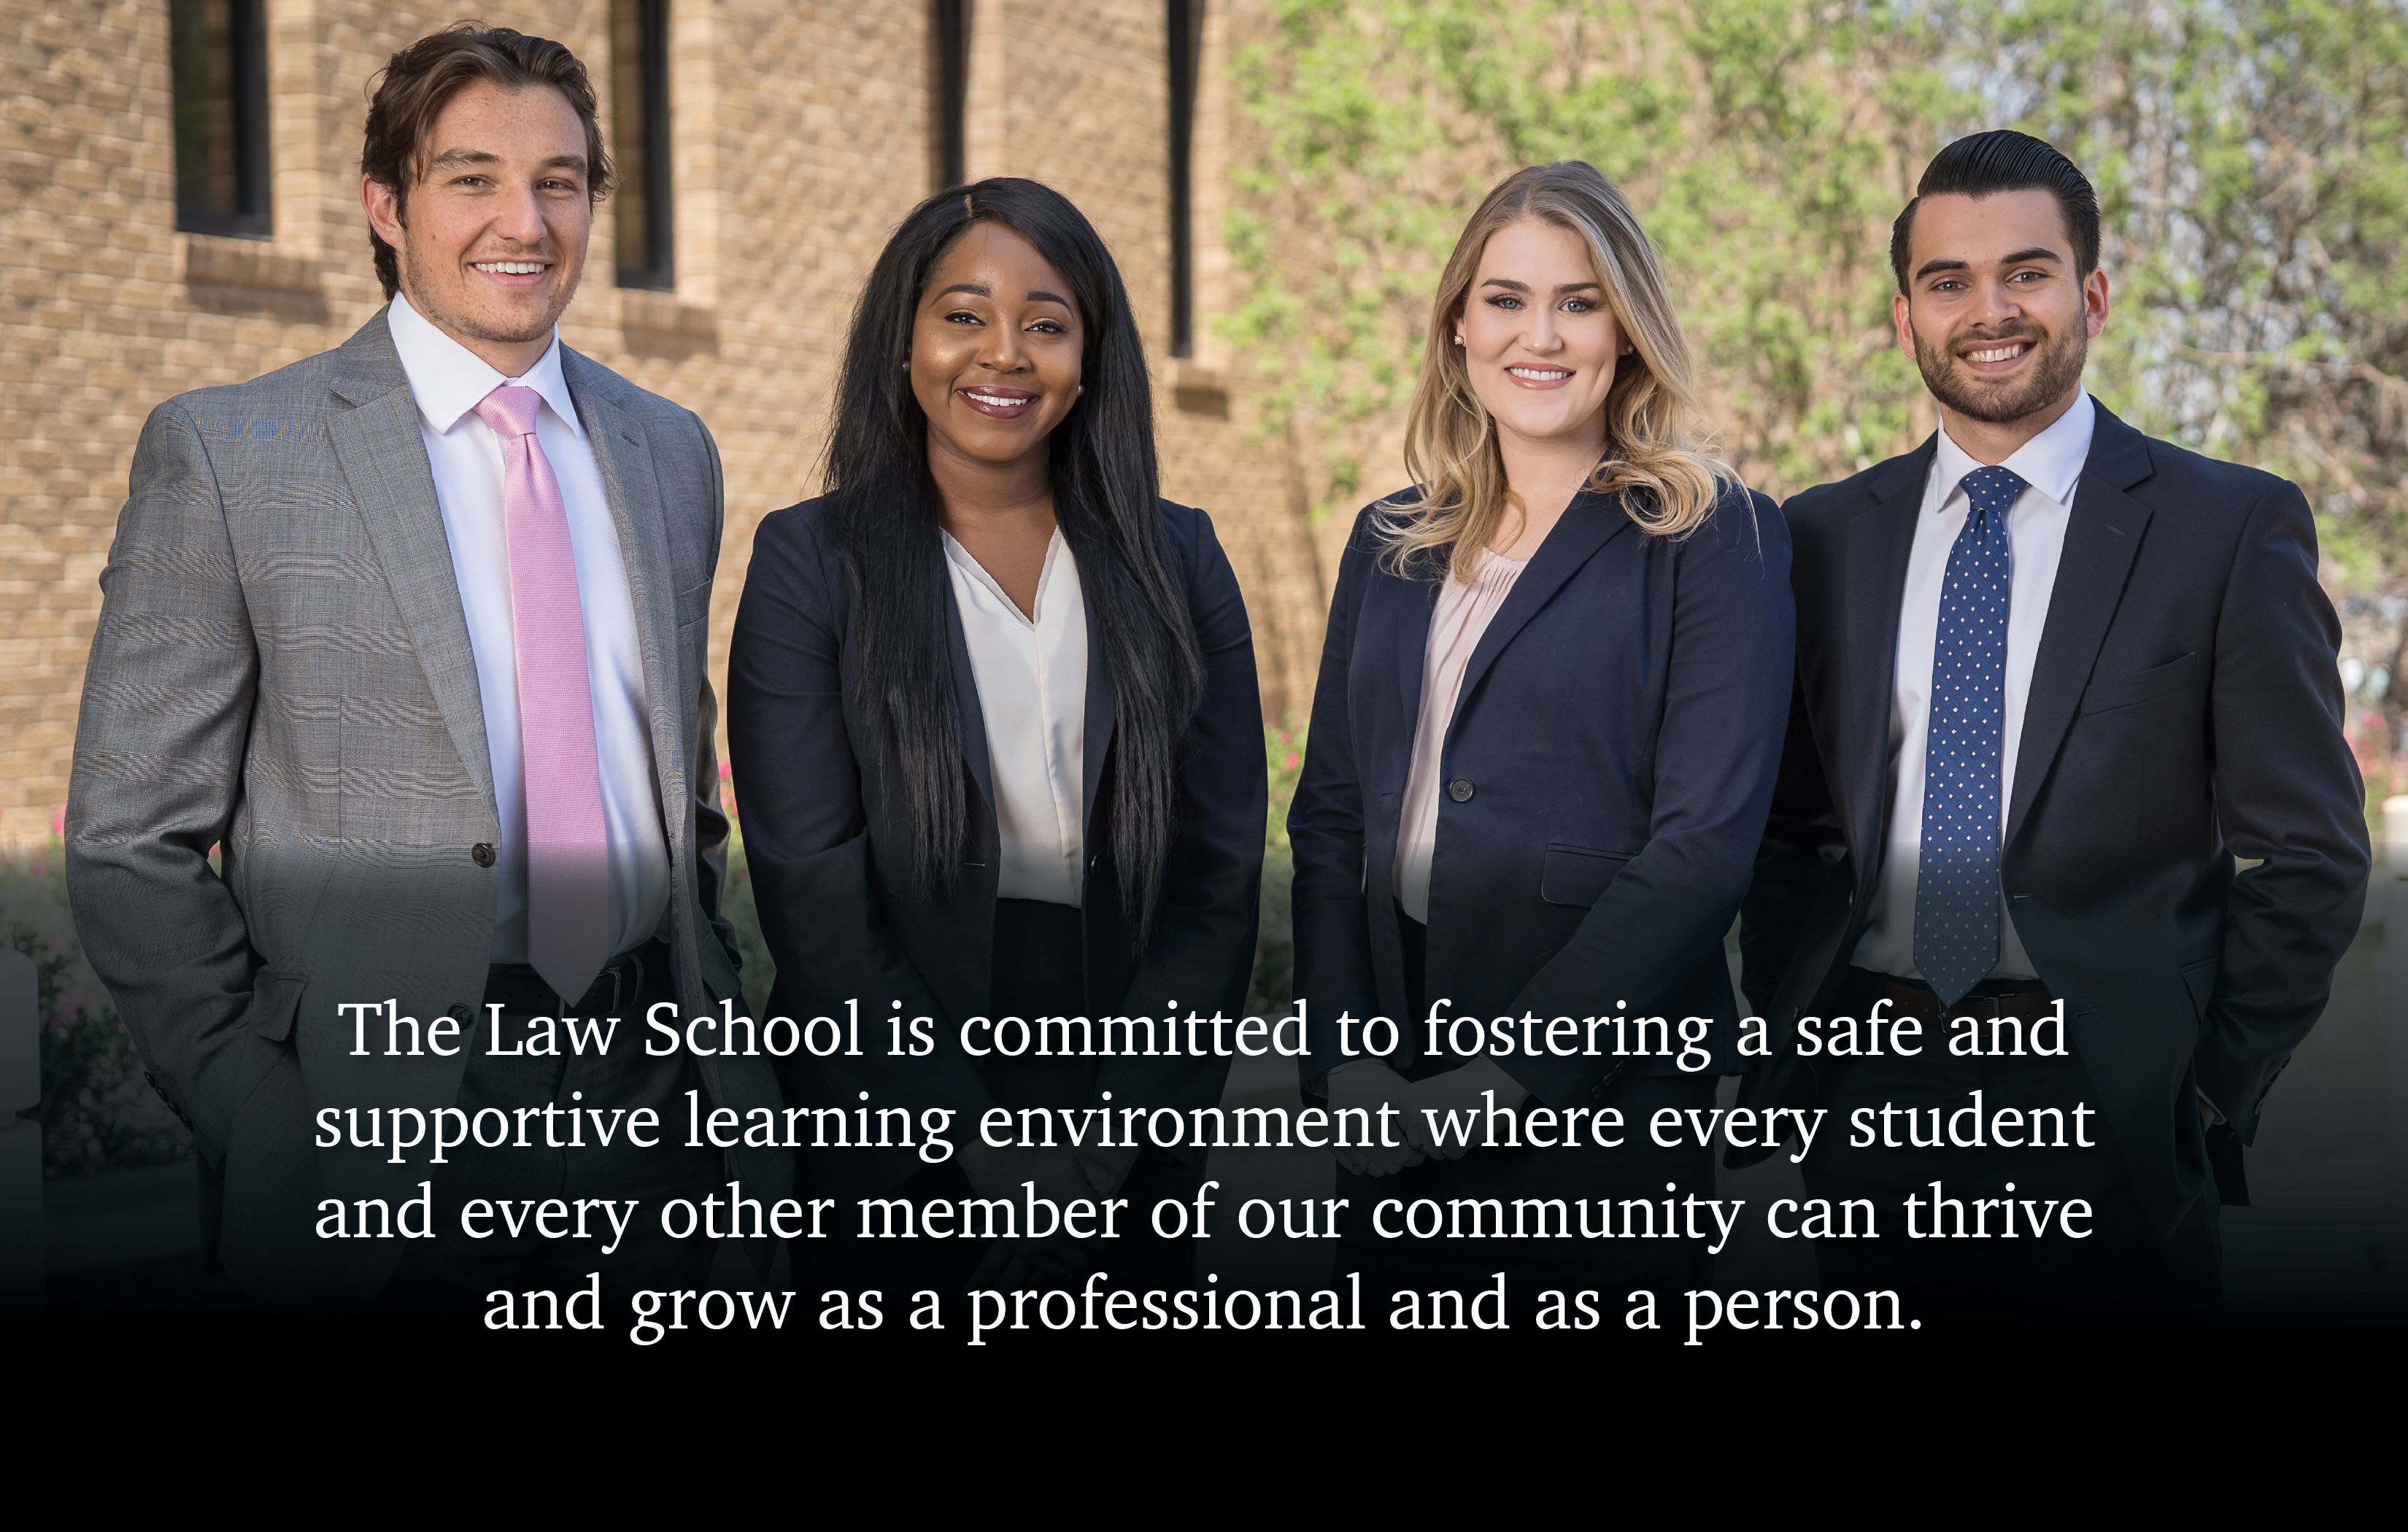 The Law School is committed to diversity, equity, and inclusion.